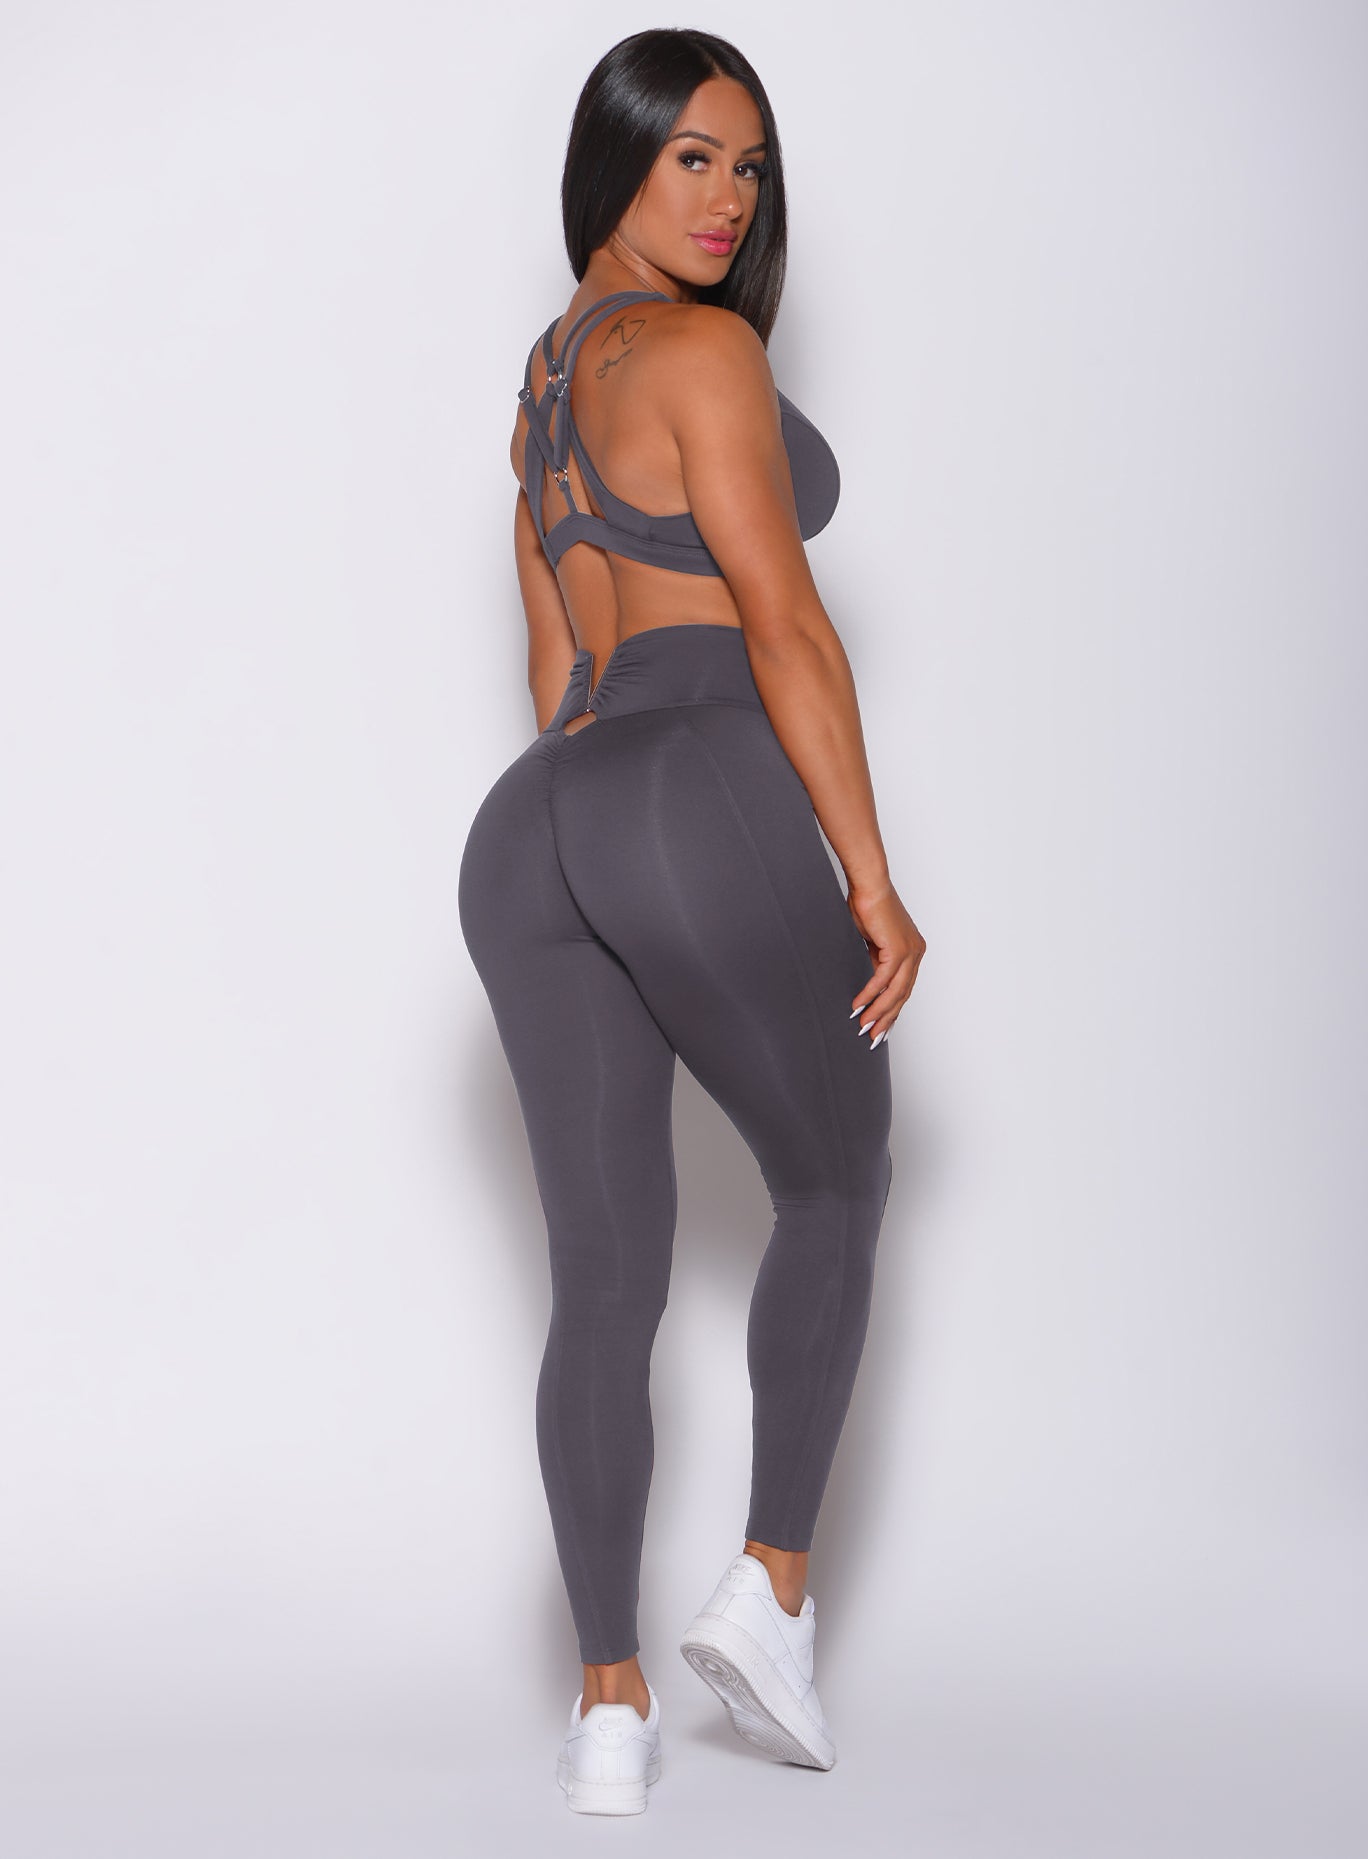 Right side profile view of a model facing to her right wearing our victory scrunch leggings in shadow color and a matching sports bra